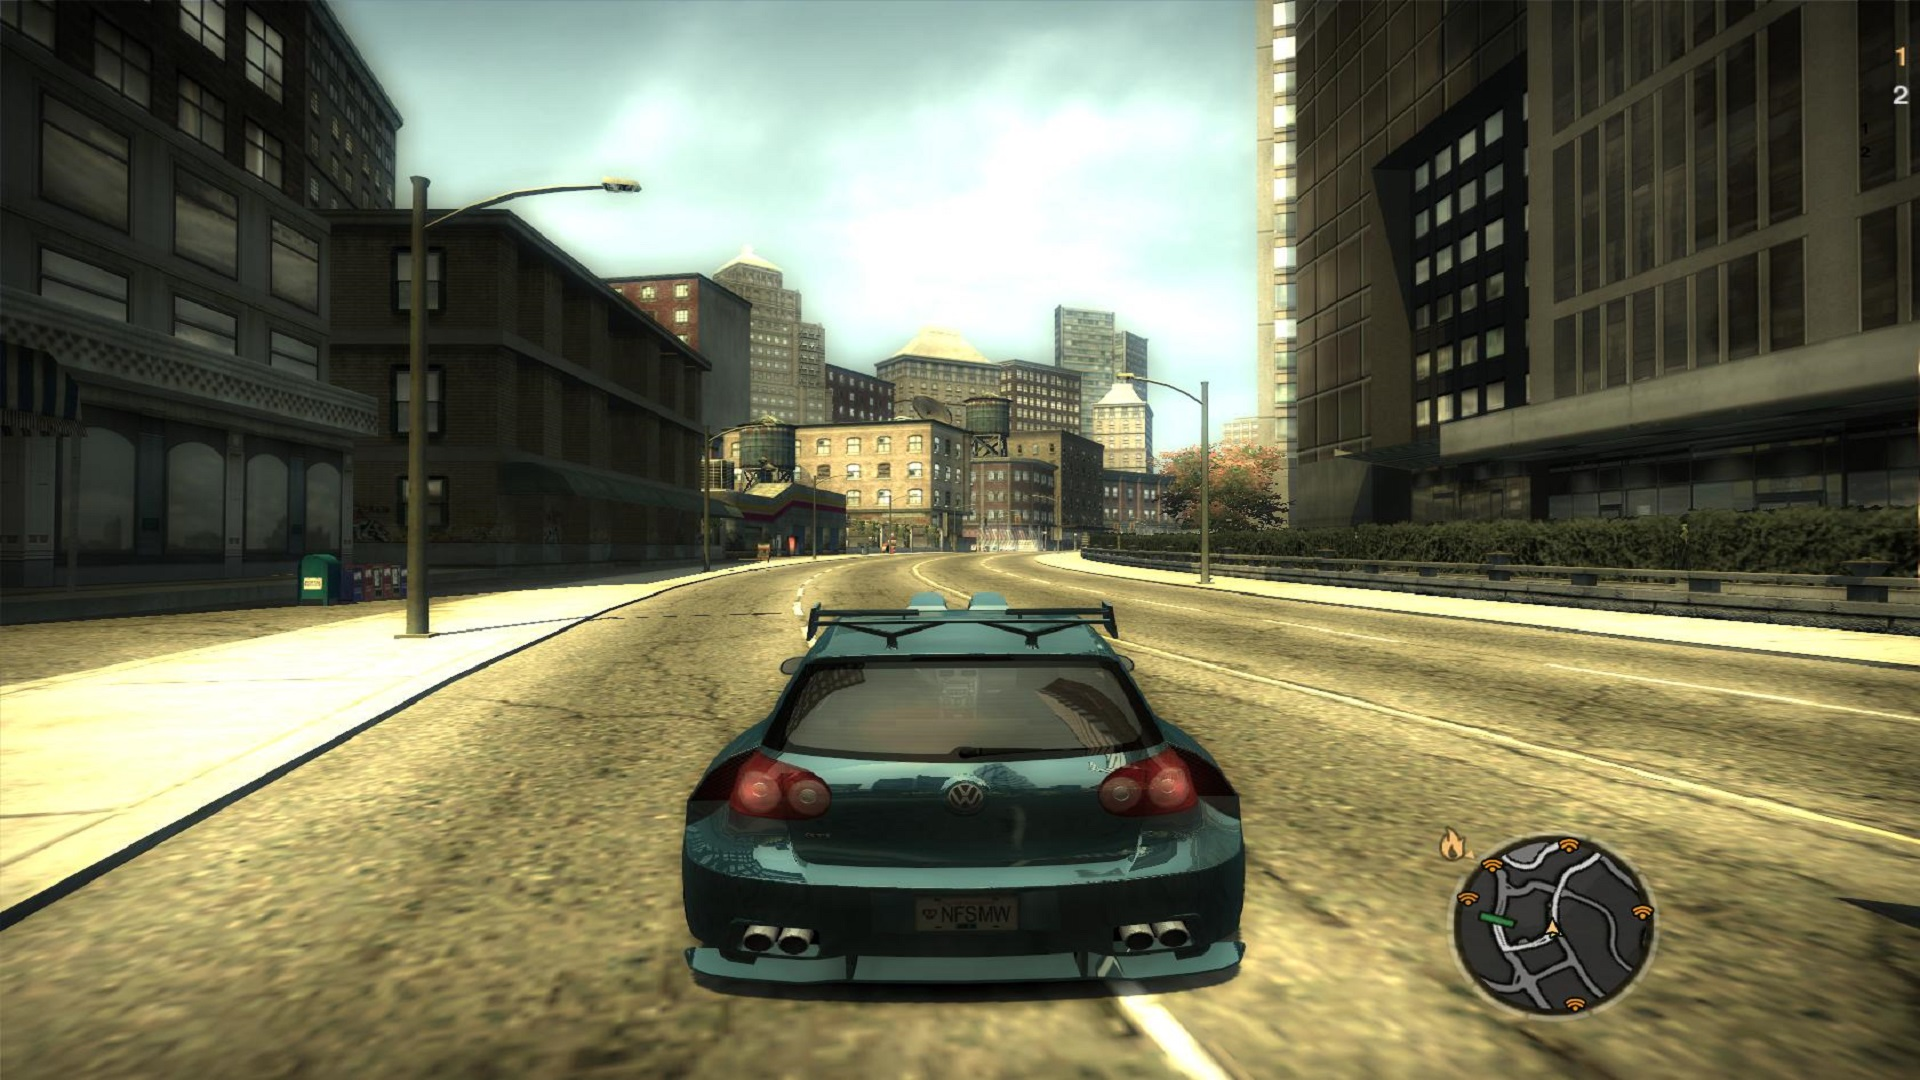 Crfxfnm c ne. NFS most wanted 2005 геймплей. Most Water 2005. Гонки NFS most wanted 2005. NFS most wanted 2005 мост.